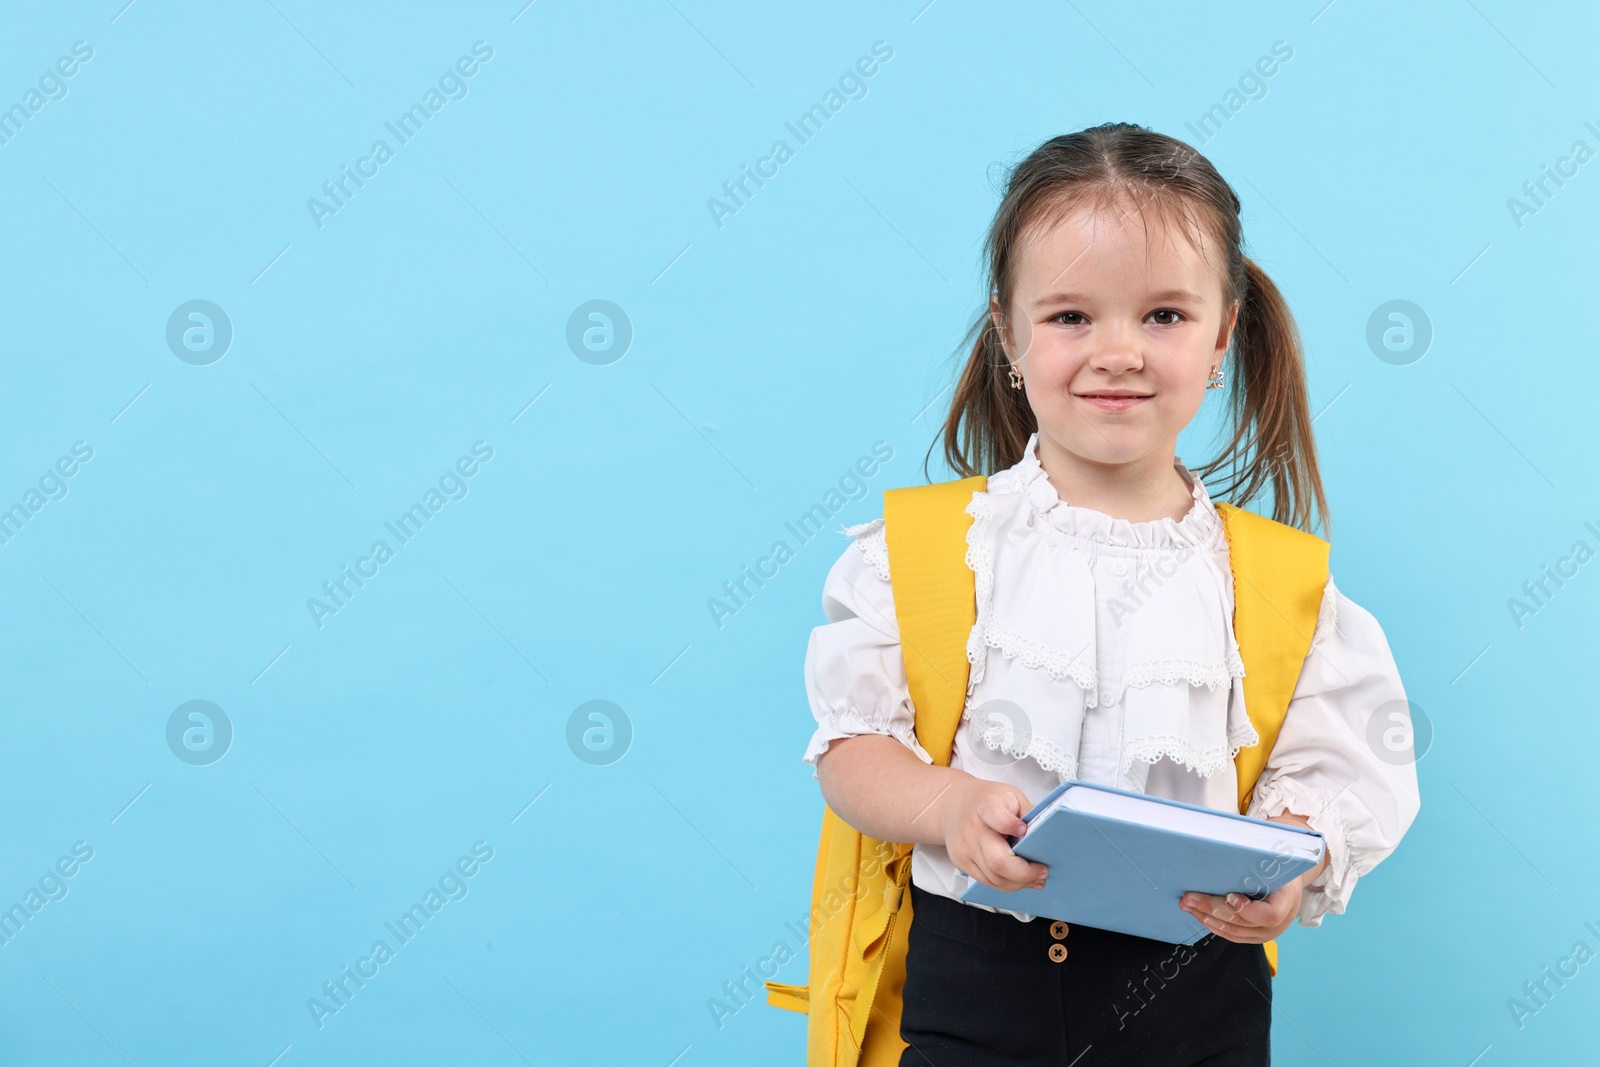 Photo of Cute little girl with book and backpack on light blue background. Space for text